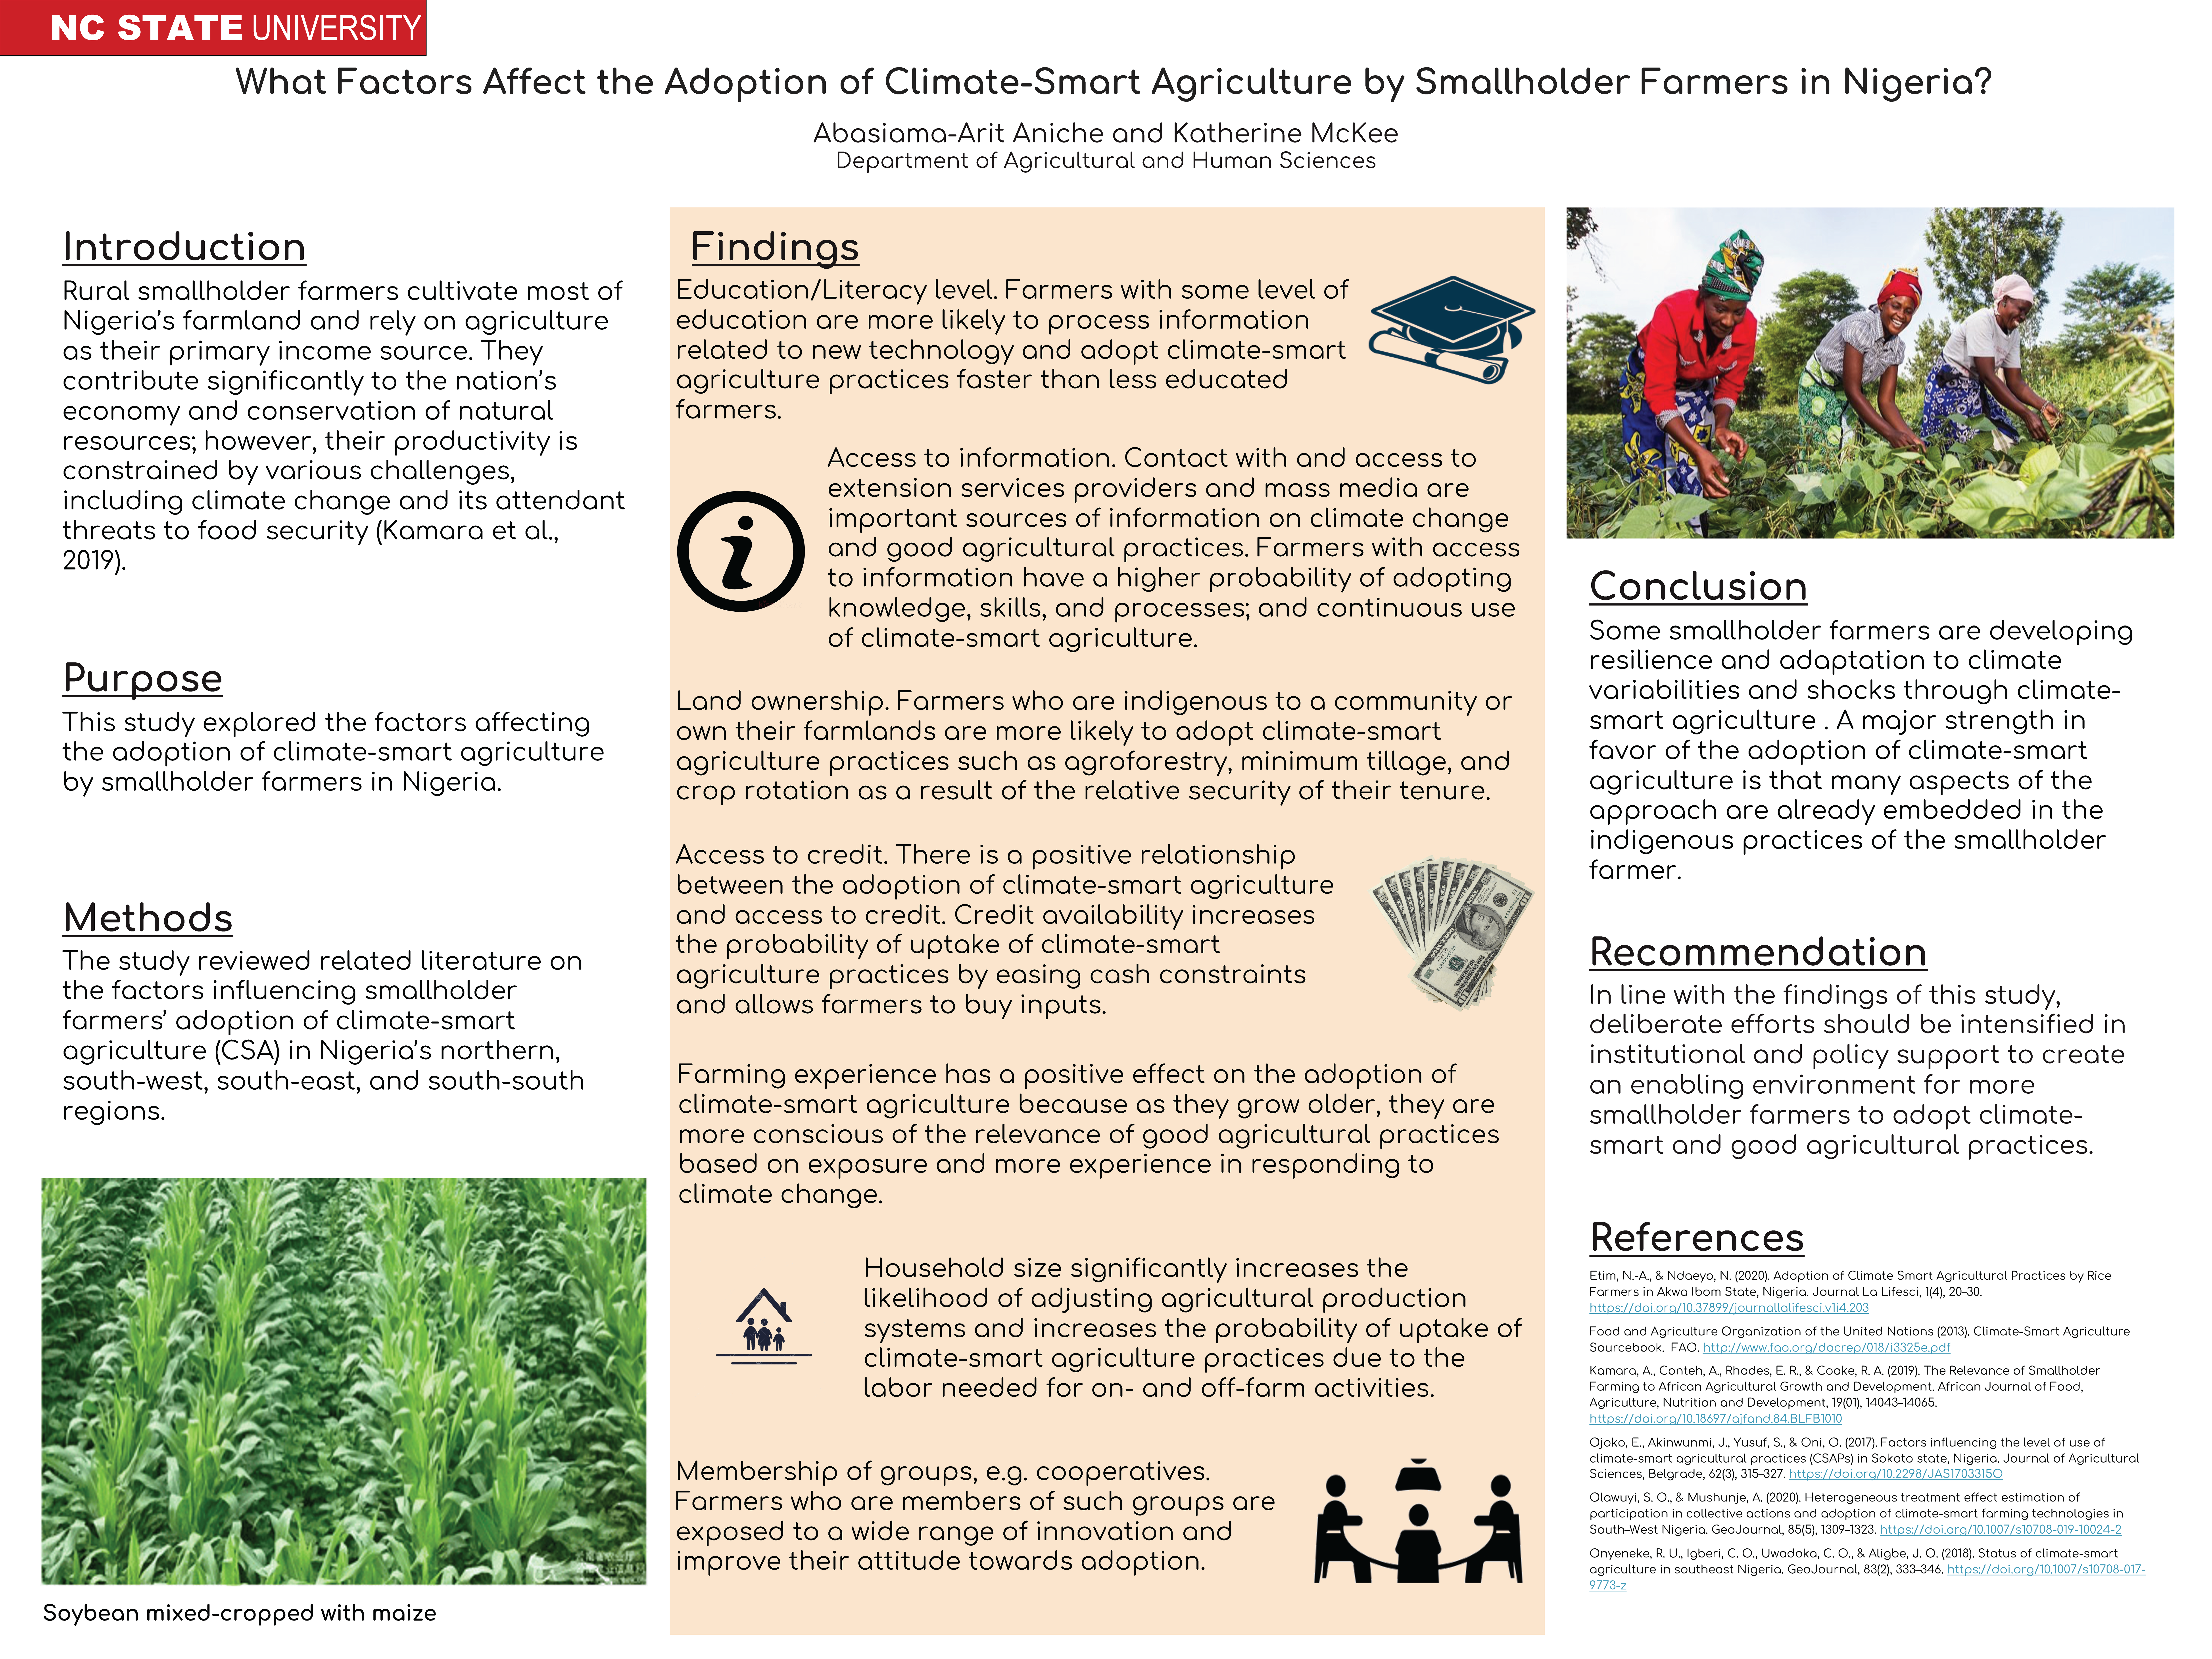 image of Abasiama-Arit Aniche's poster, "What Factors Affect the Adoption of Climate-Smart Agriculture by Smallholder Farmers in Nigeria?"